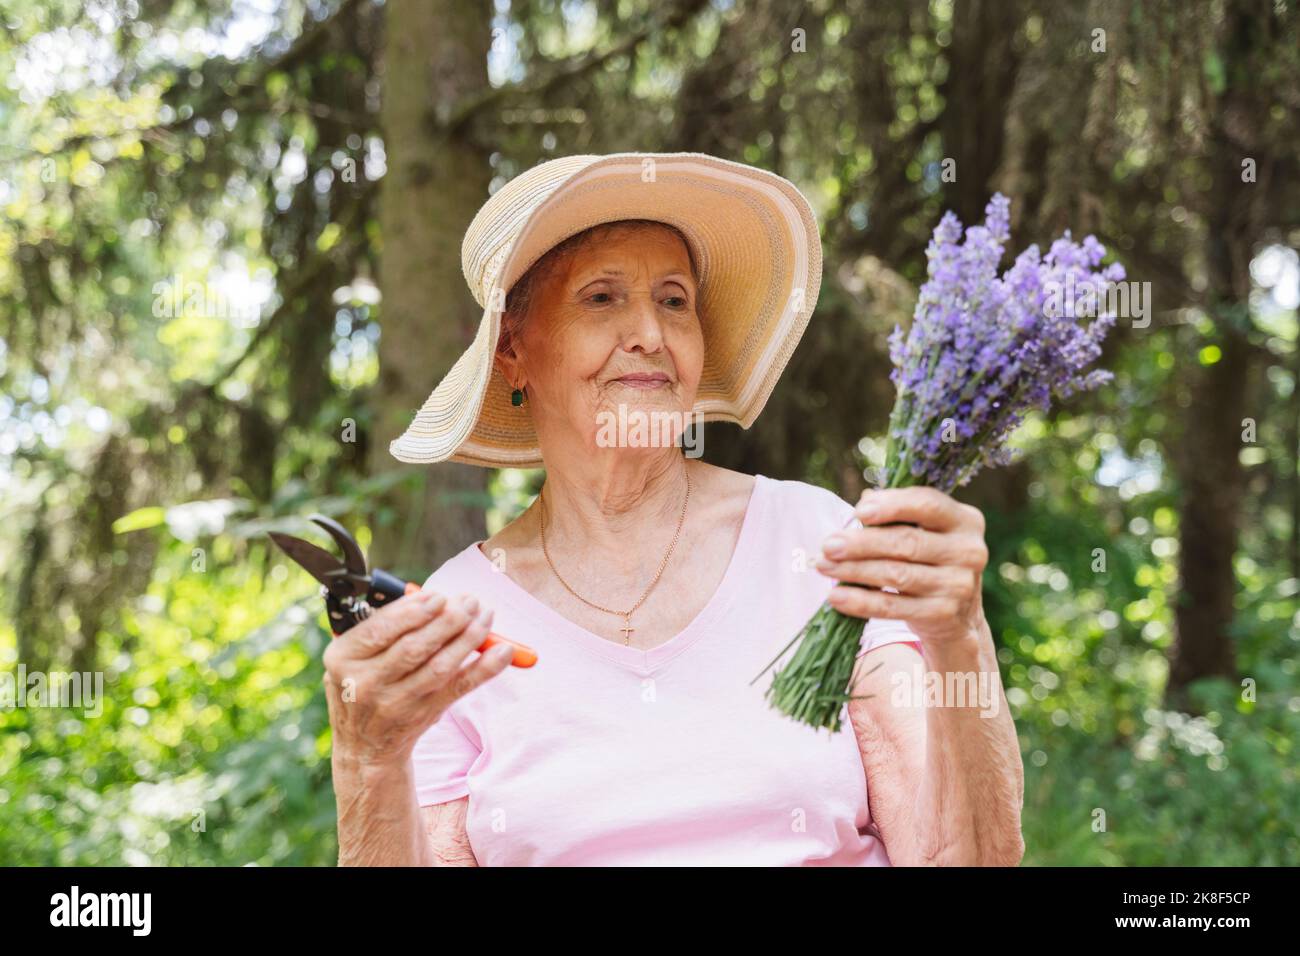 Senior woman with pruning shears holding bunch of lavender flowers Stock Photo